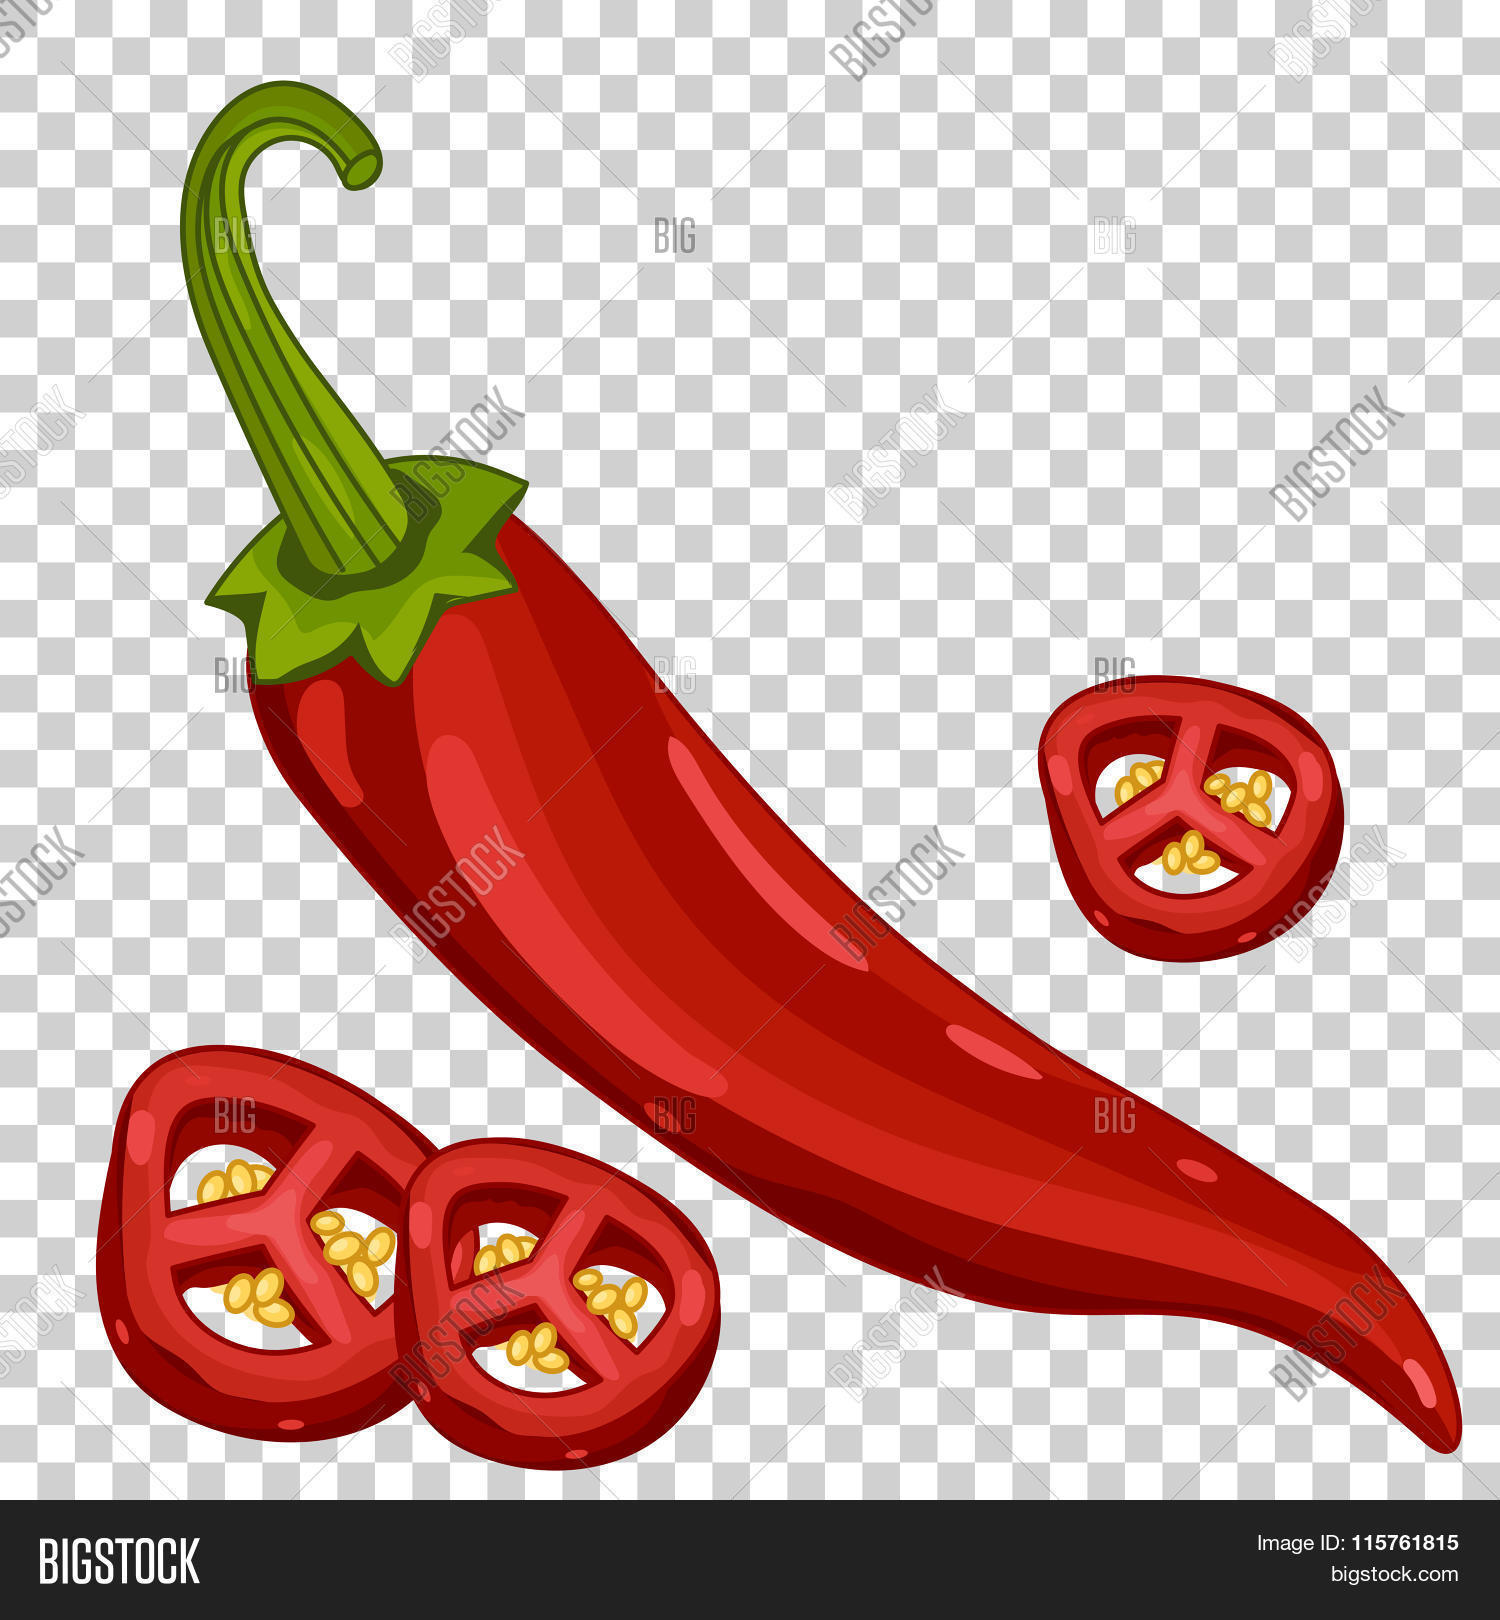 Chili Pepper Isolated On Vector & Photo | Bigstock